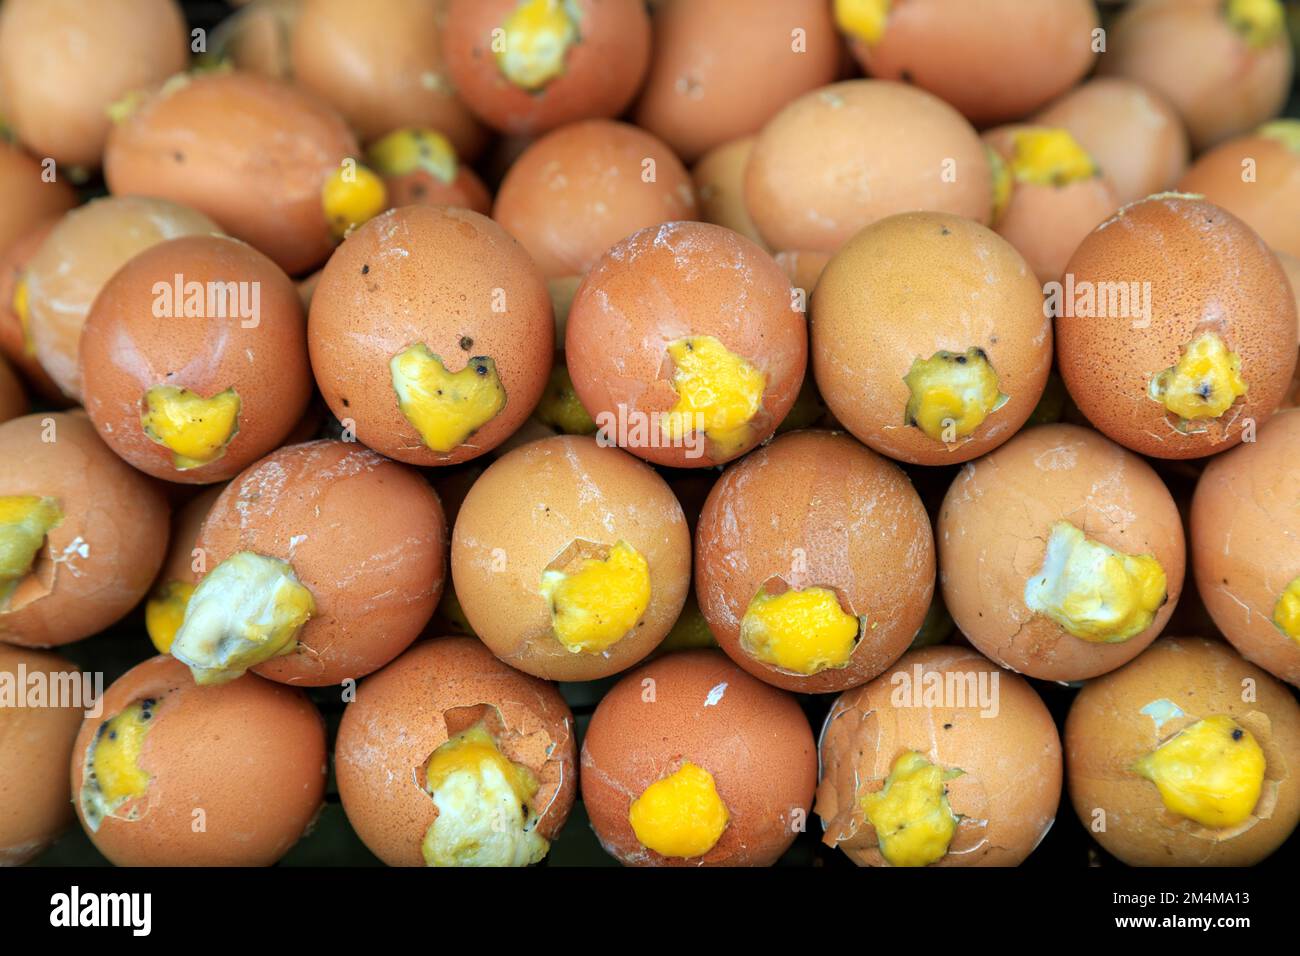 Balut is a fertilized developing egg embryo that is boiled or steamed and eaten from the shell. It is commonly sold as street food in South China and Stock Photo